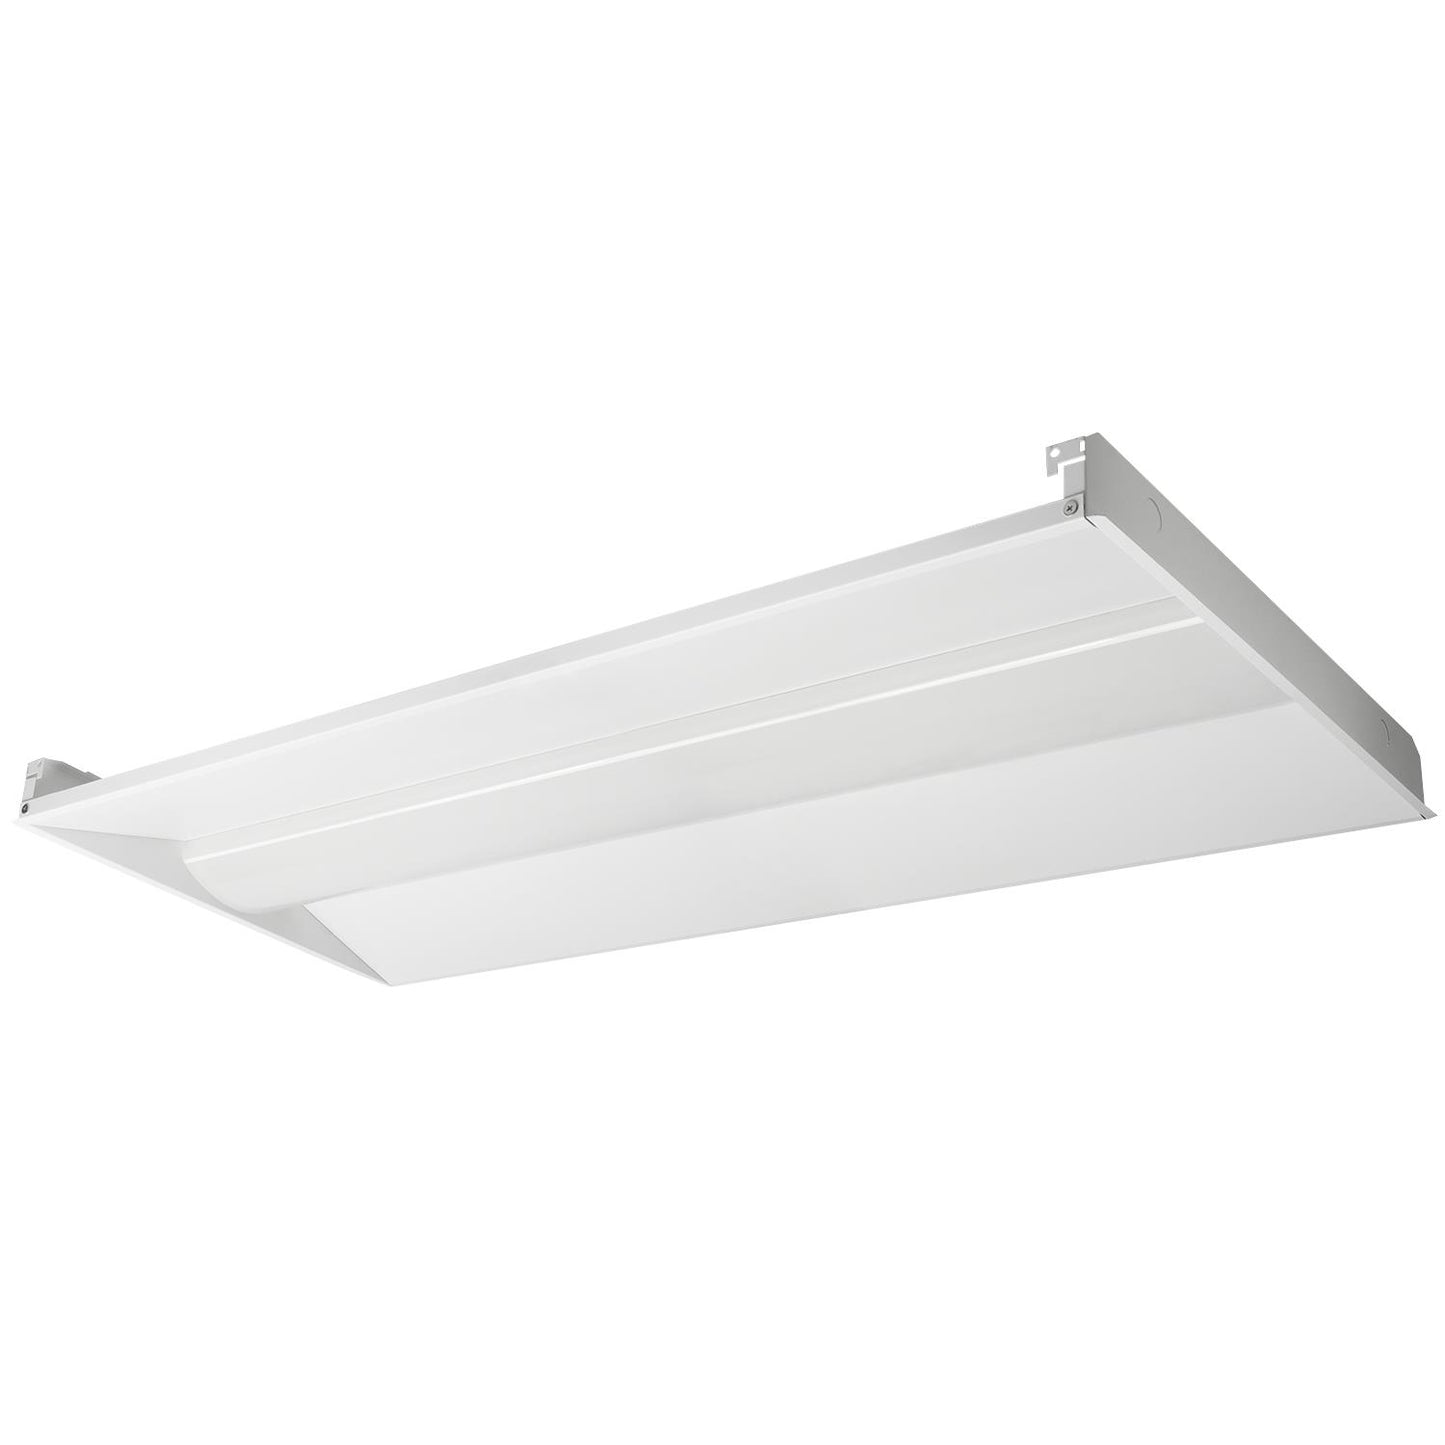 Sunlite 85215 2x4 FT LED Flat Panel Troffer Light Fixture, 34 Watts, 4285 Lumens, 35K/40K/50K Adjustable Color Temperature, 120-277V, Dimmable, 50,000 Hour Life Span, Energy Star, UL & DLC Approved